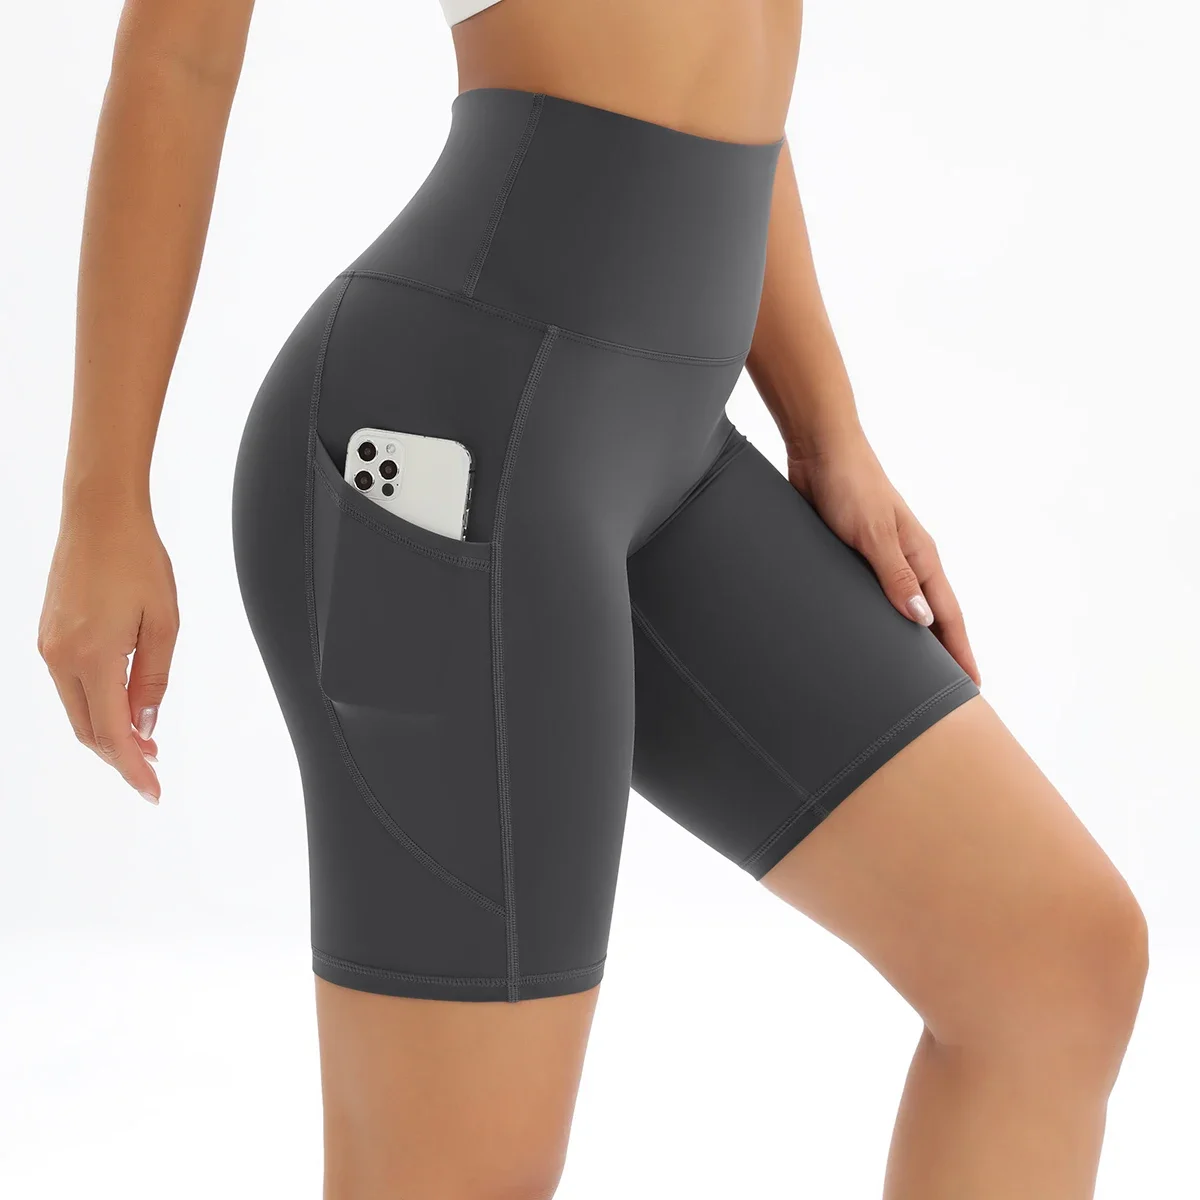 Yoga Shorts Women Fitness Shorts With Pockets Running Cycling Breathable Sports Leggings High Waist Summer Workout Shorts